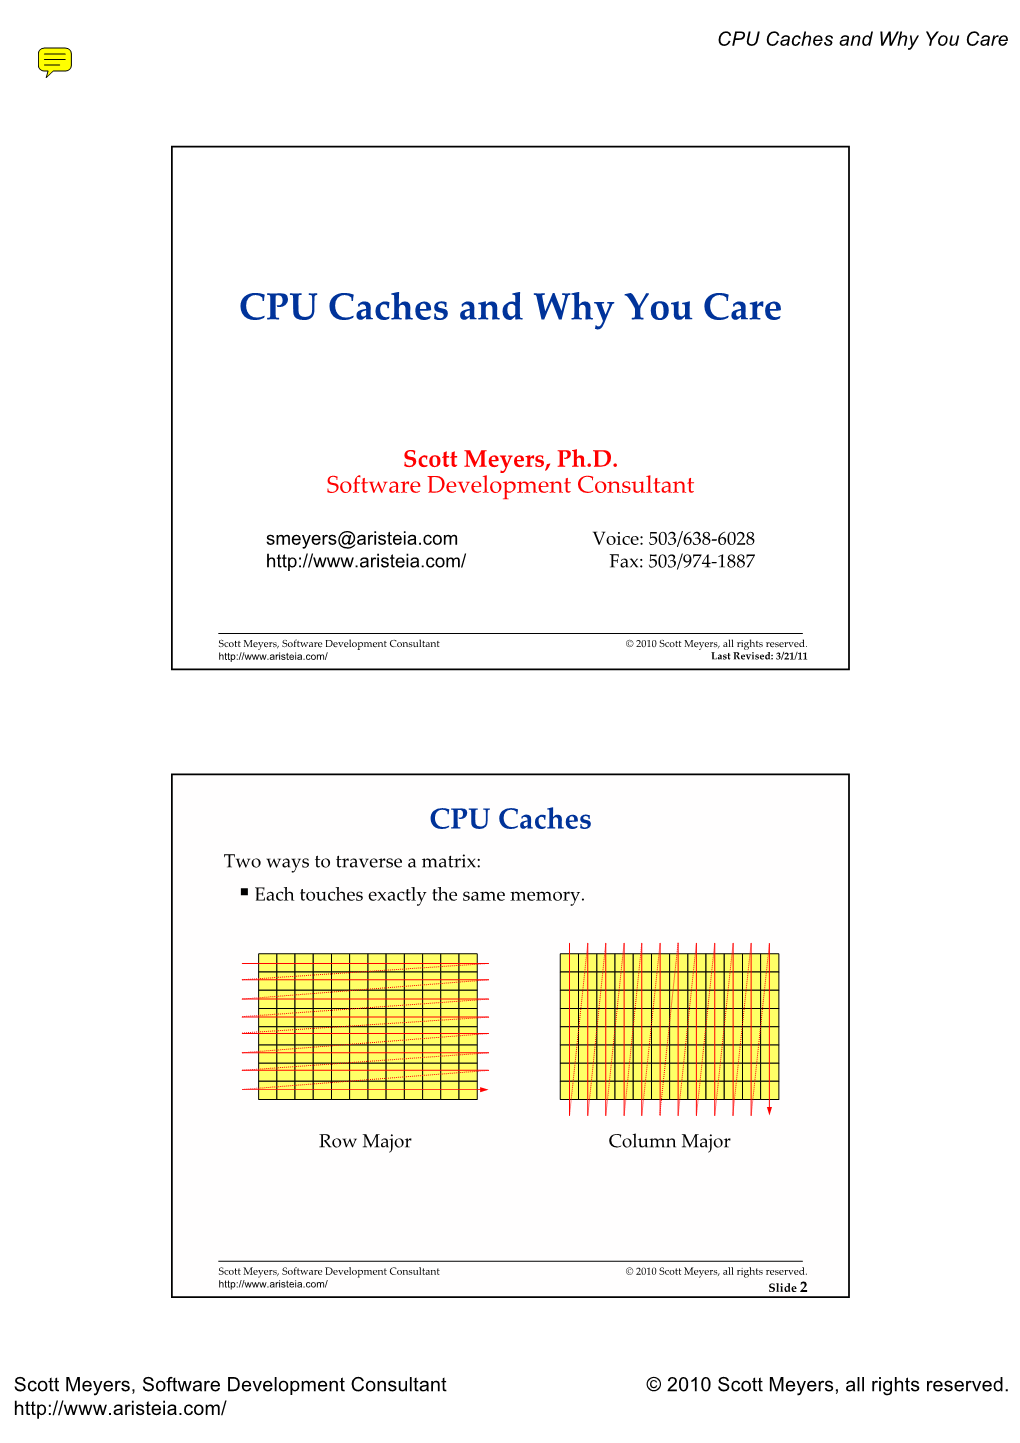 CPU Caches and Why You Care